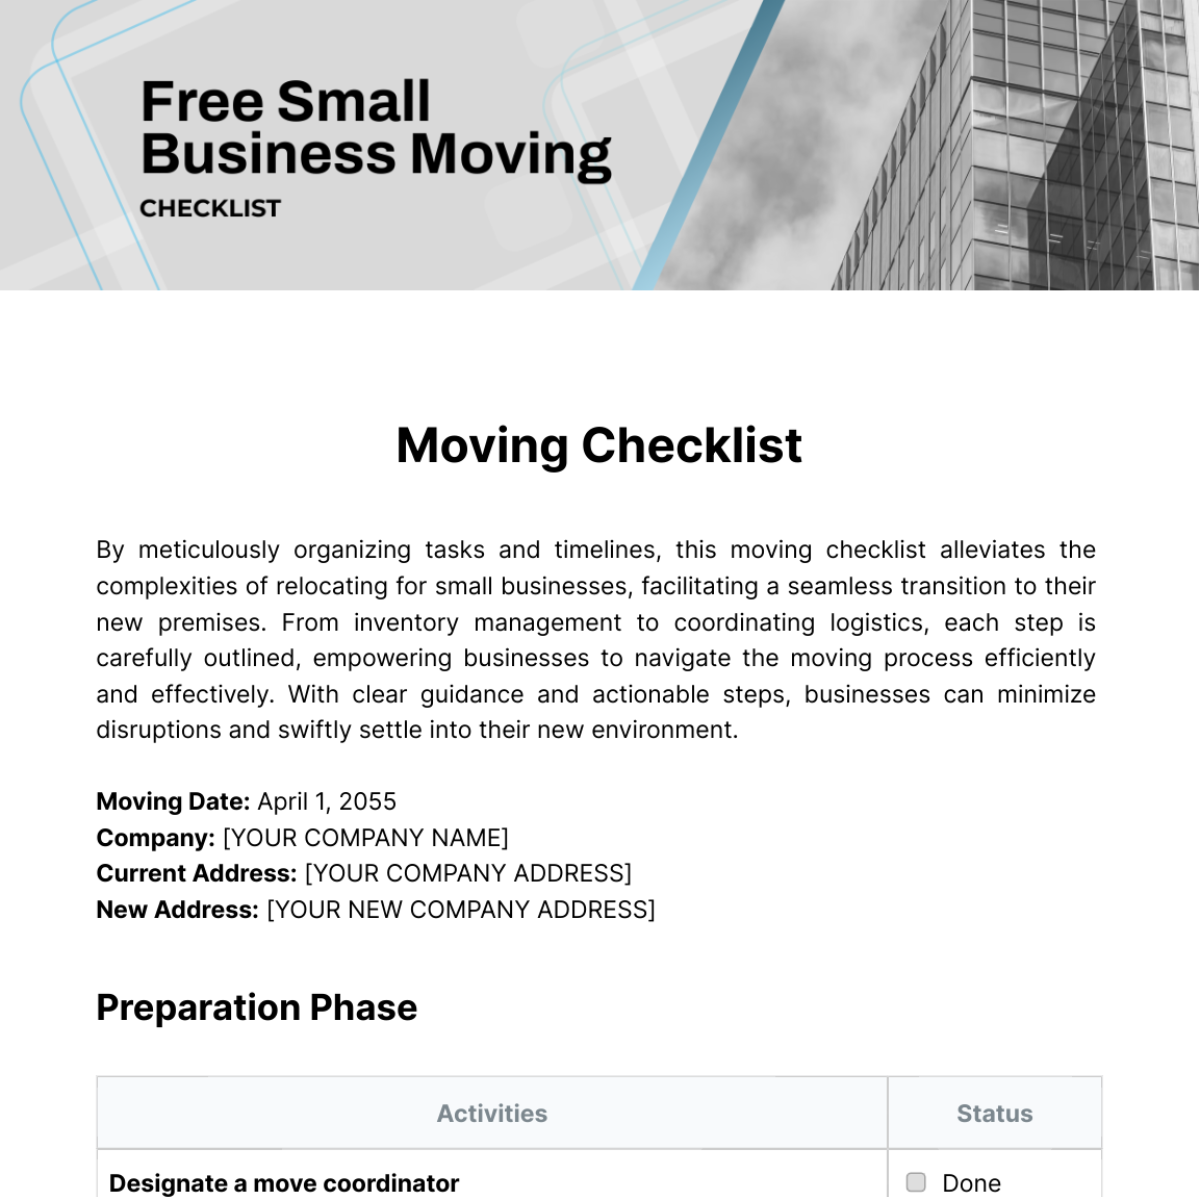 Free Small Business Moving Checklist Template